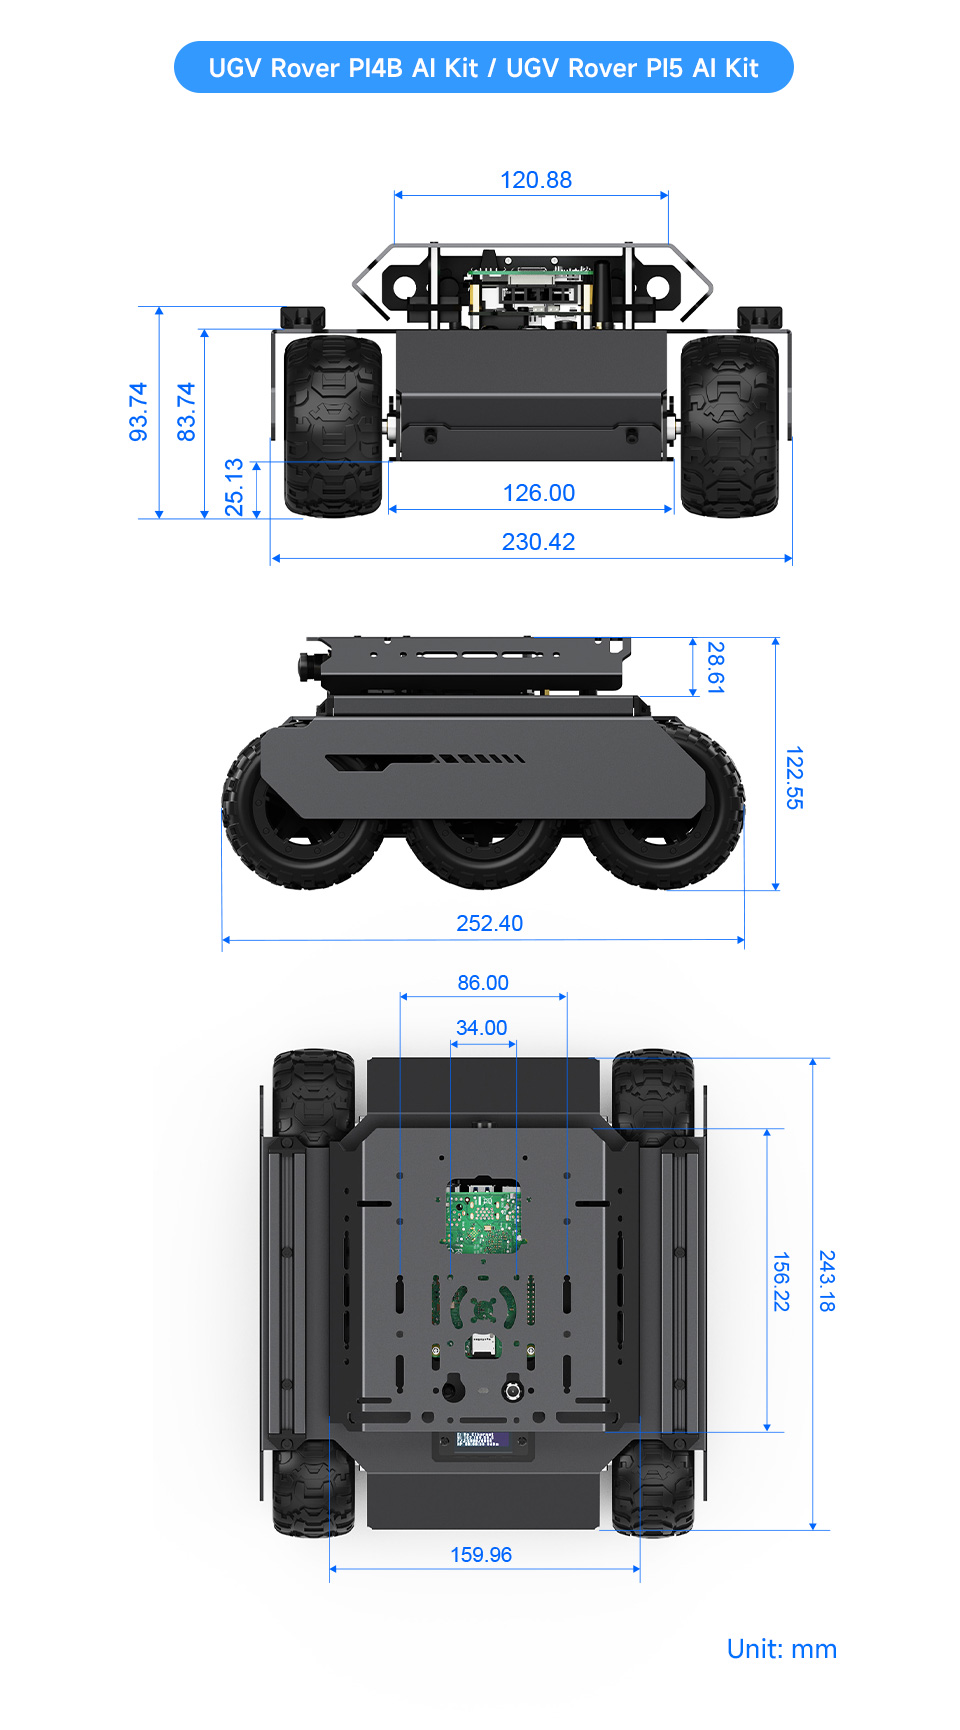 UGV Rover AI Kit without PT module, outline dimensions